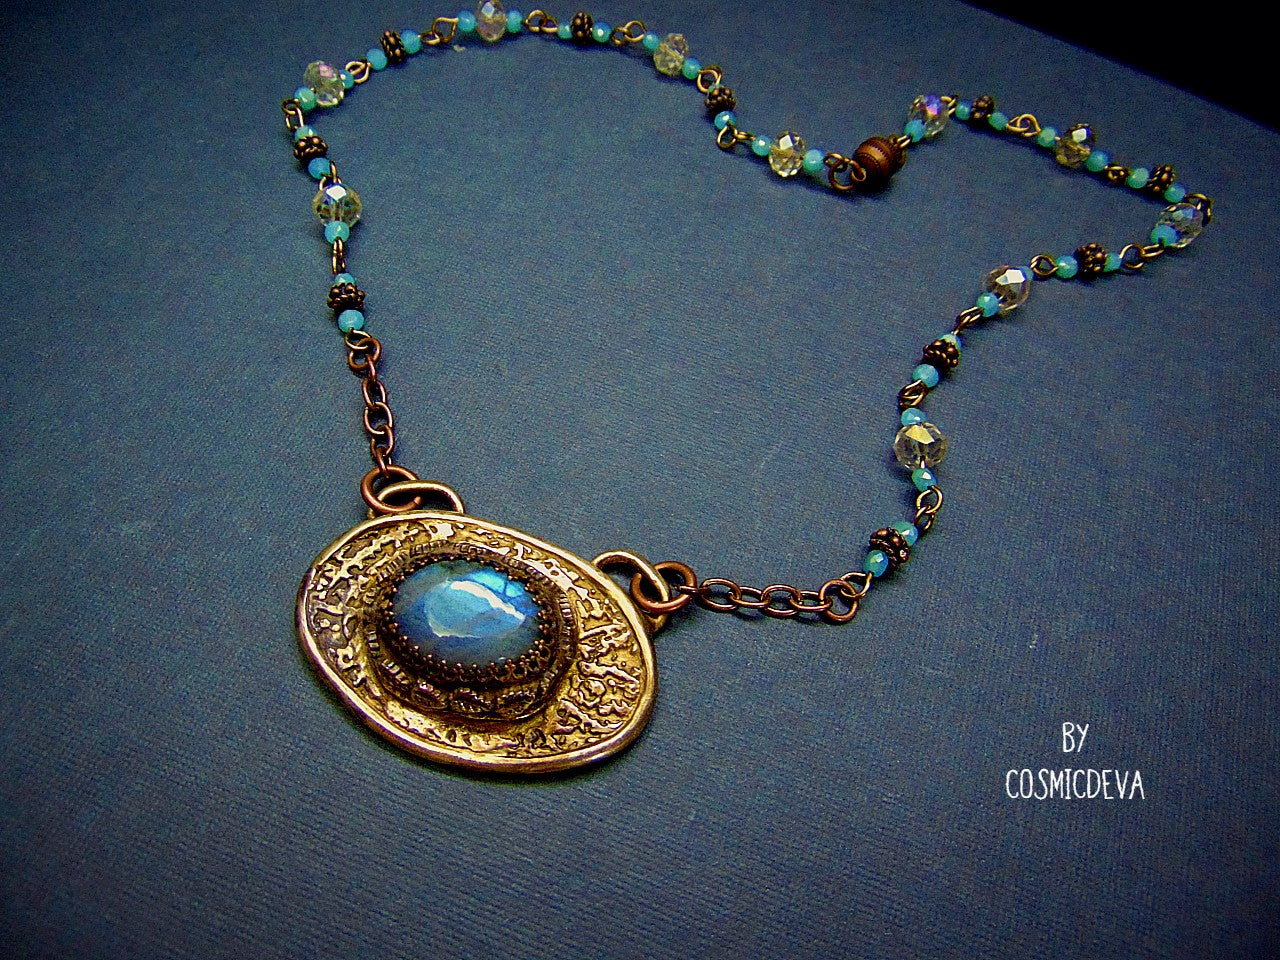 This necklace features a stunning blue labradorite set in a bezel setting, adding a touch of flash to your ensemble